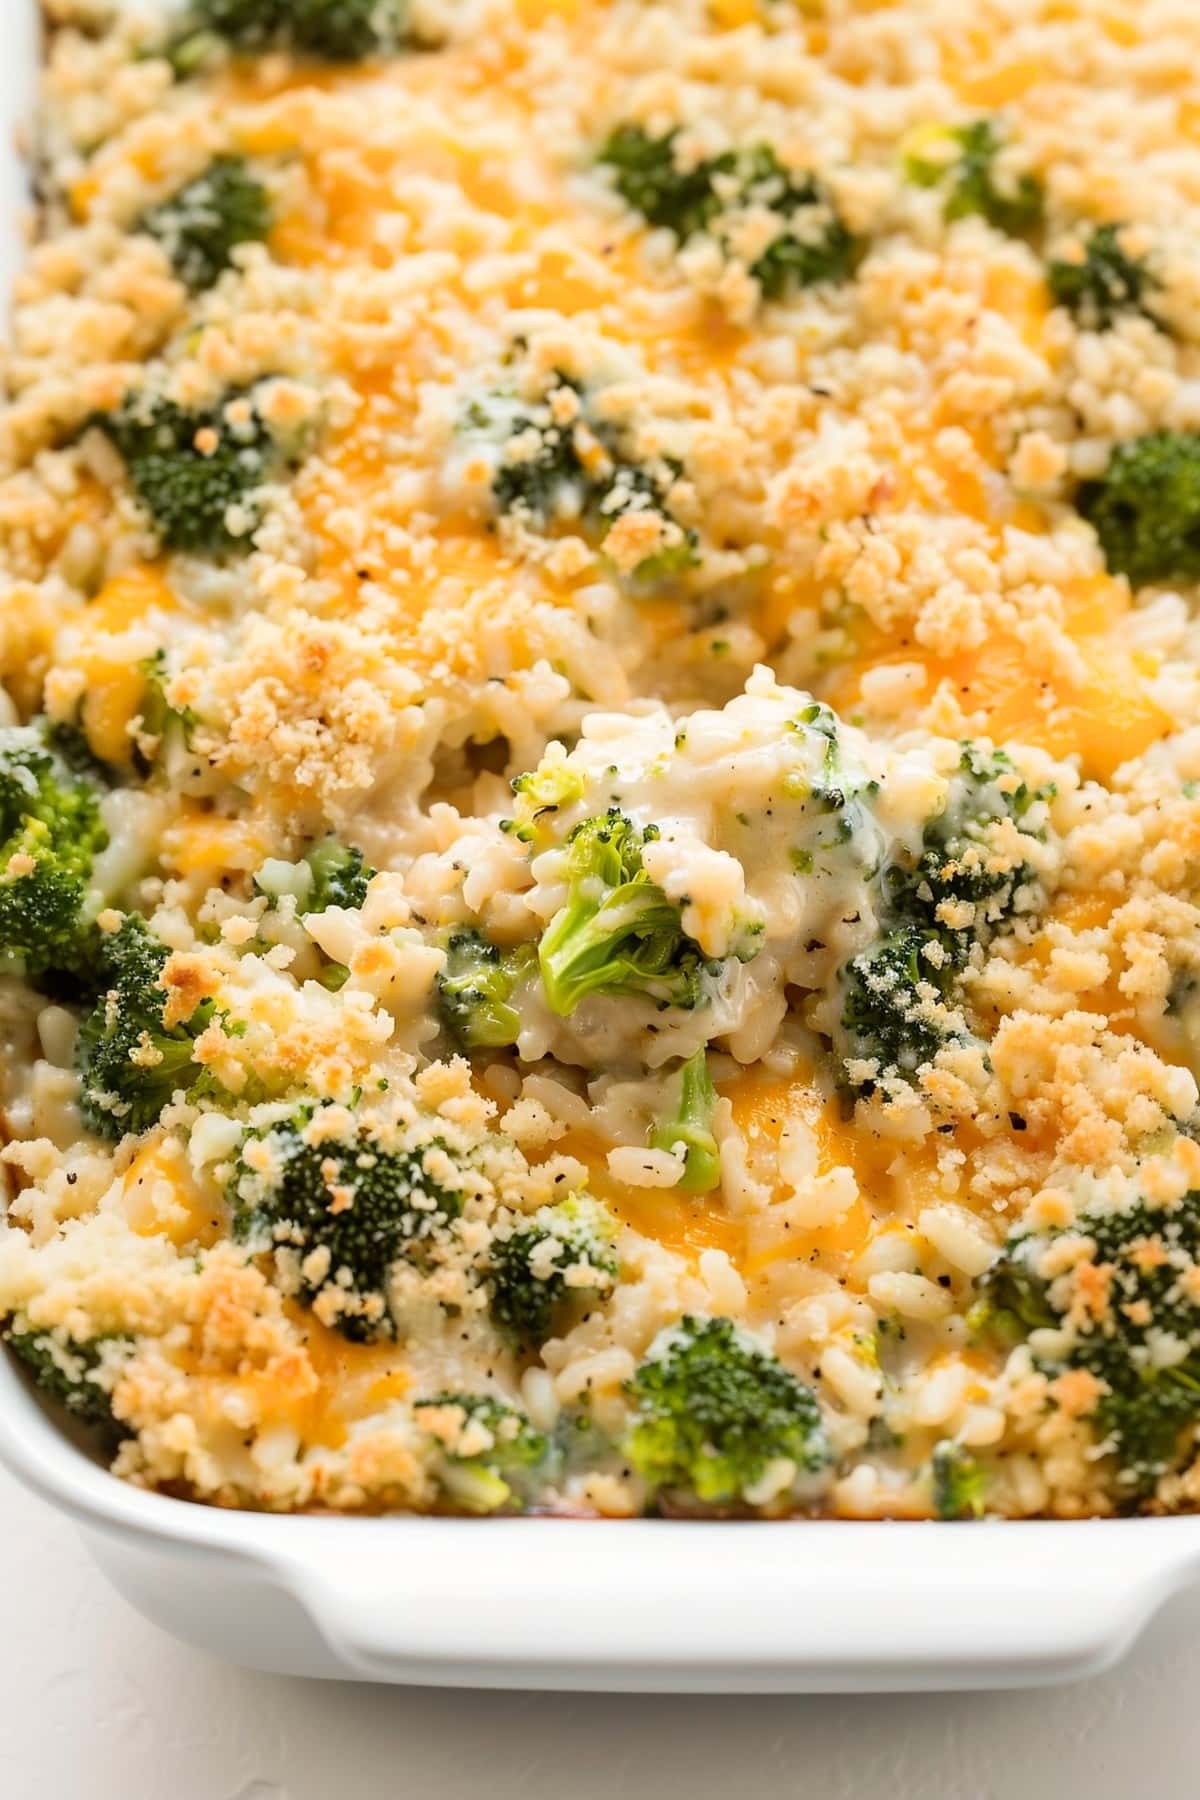 Homemade broccoli rice casserole with a golden breadcrumb topping, fresh from the oven